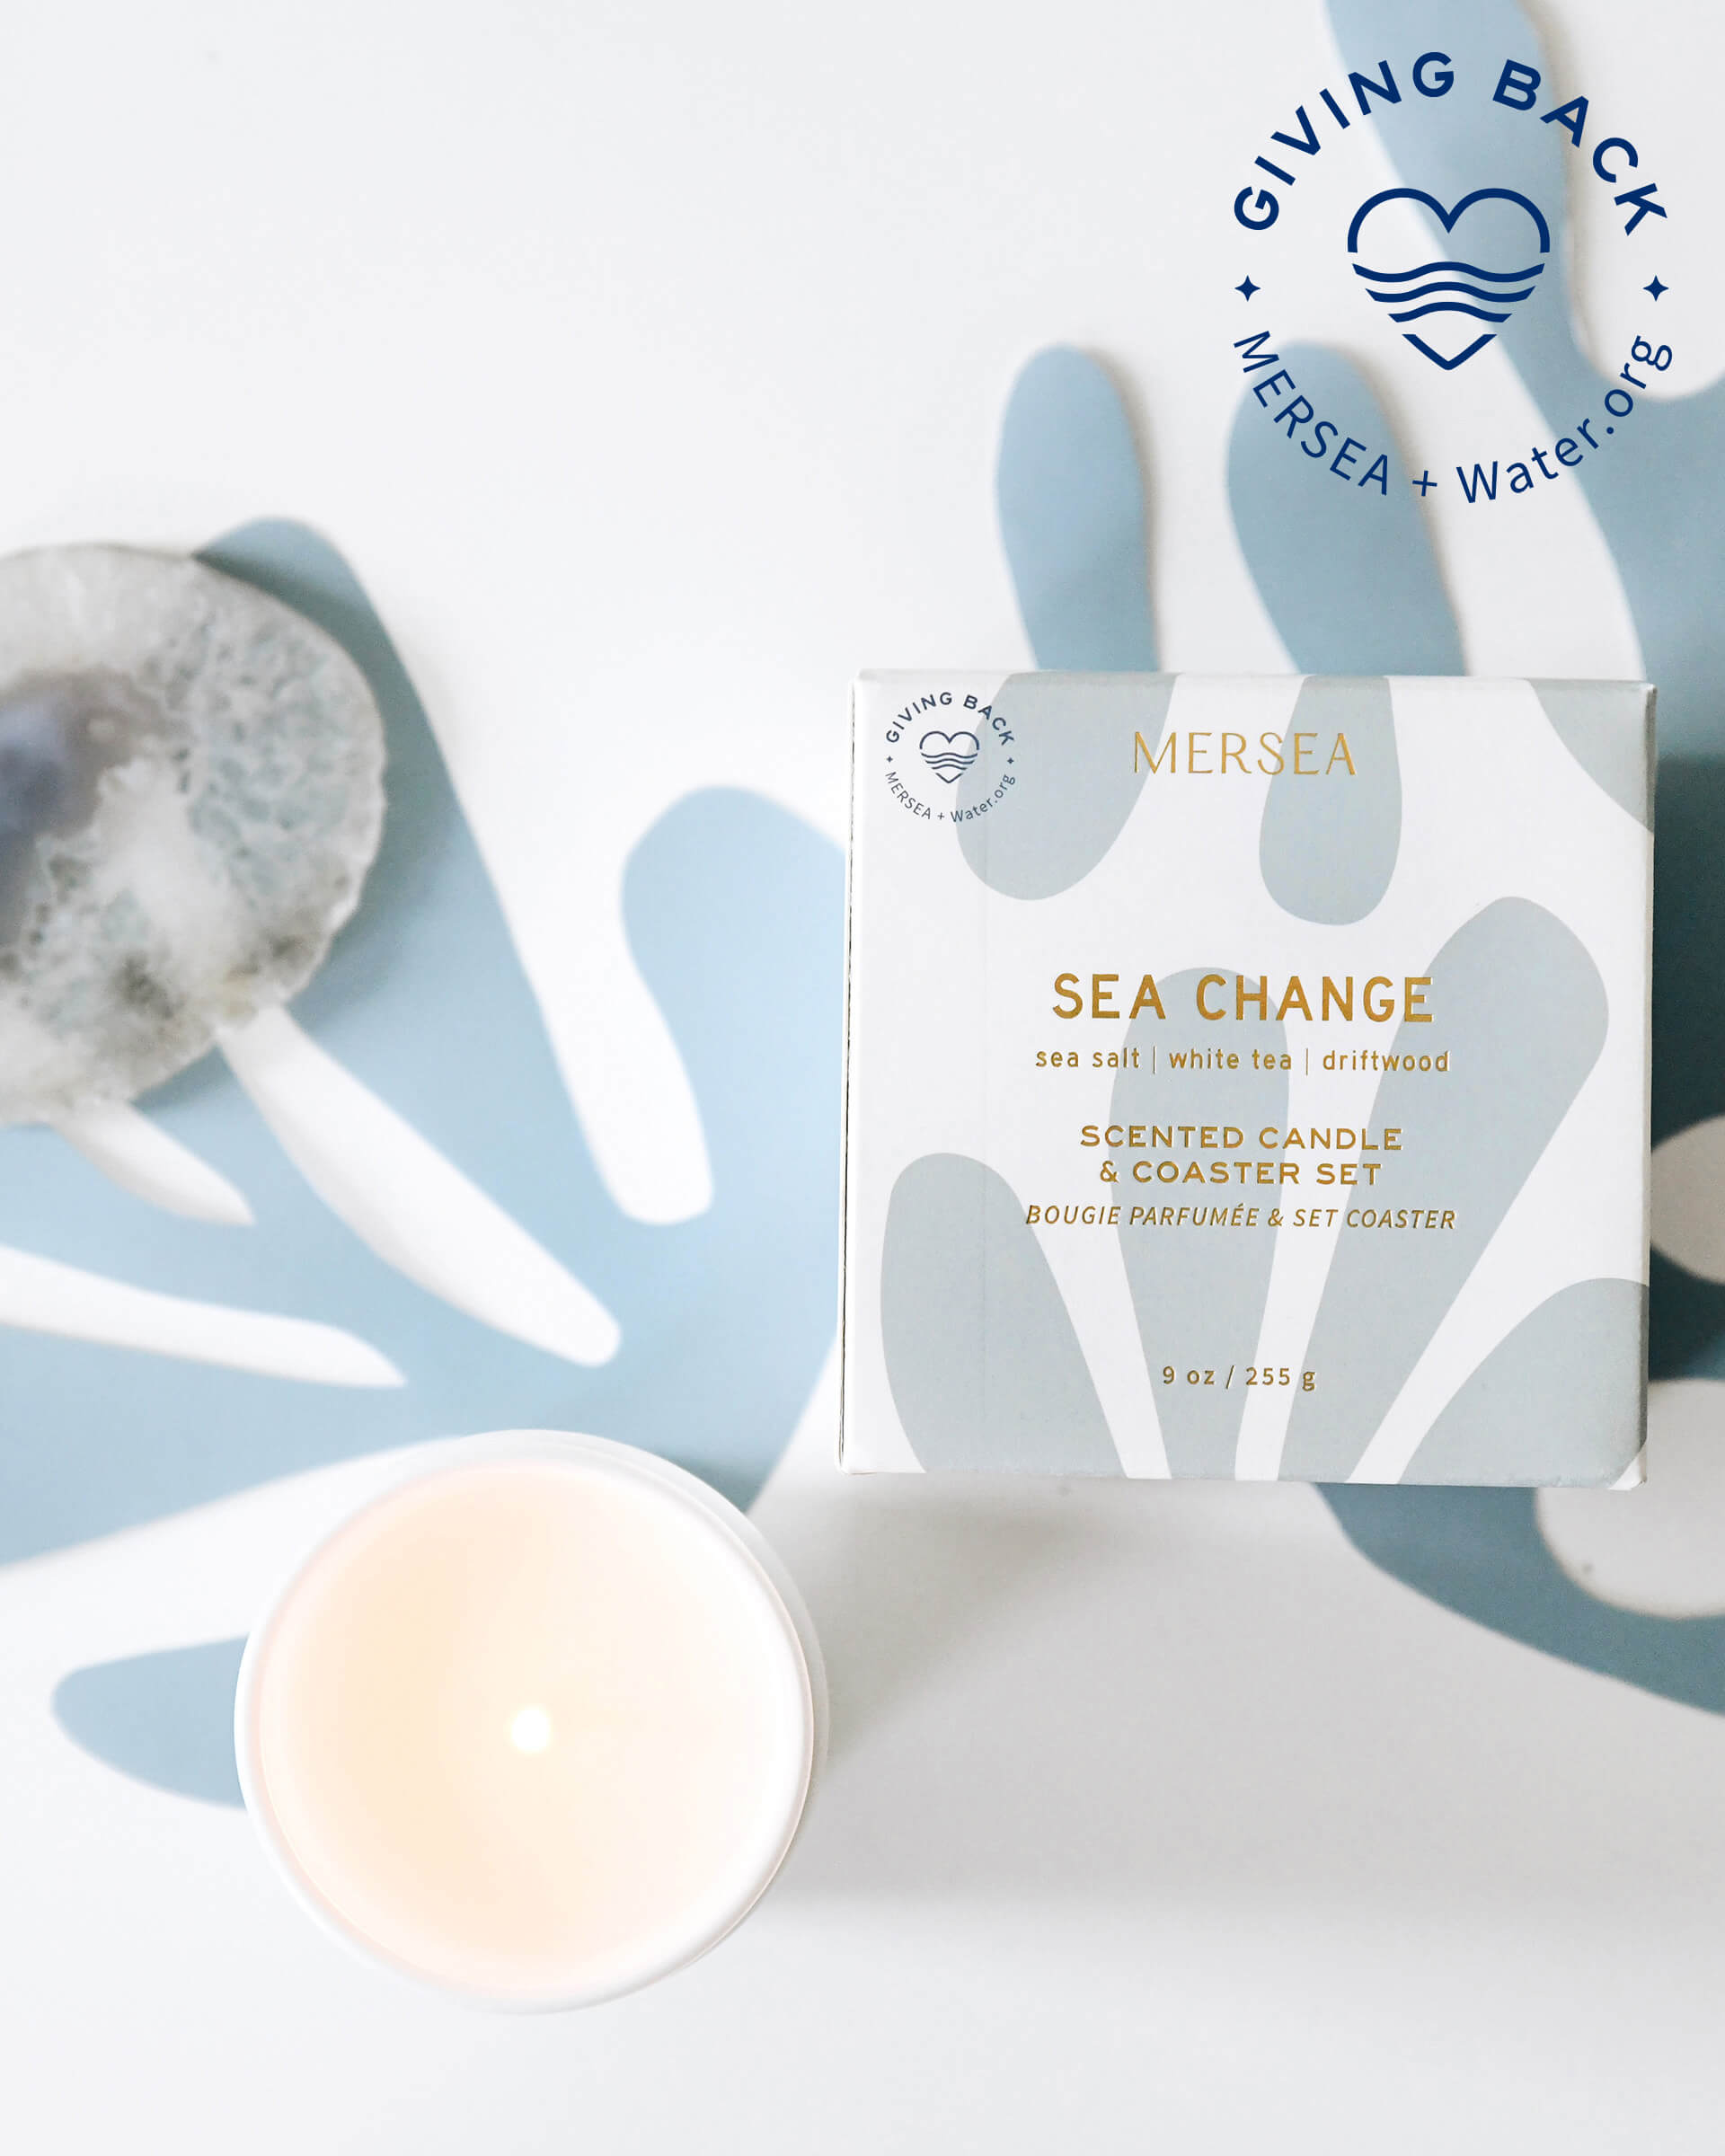 boxed sea change candle with coaster and unboxed white candle on light blue and white background